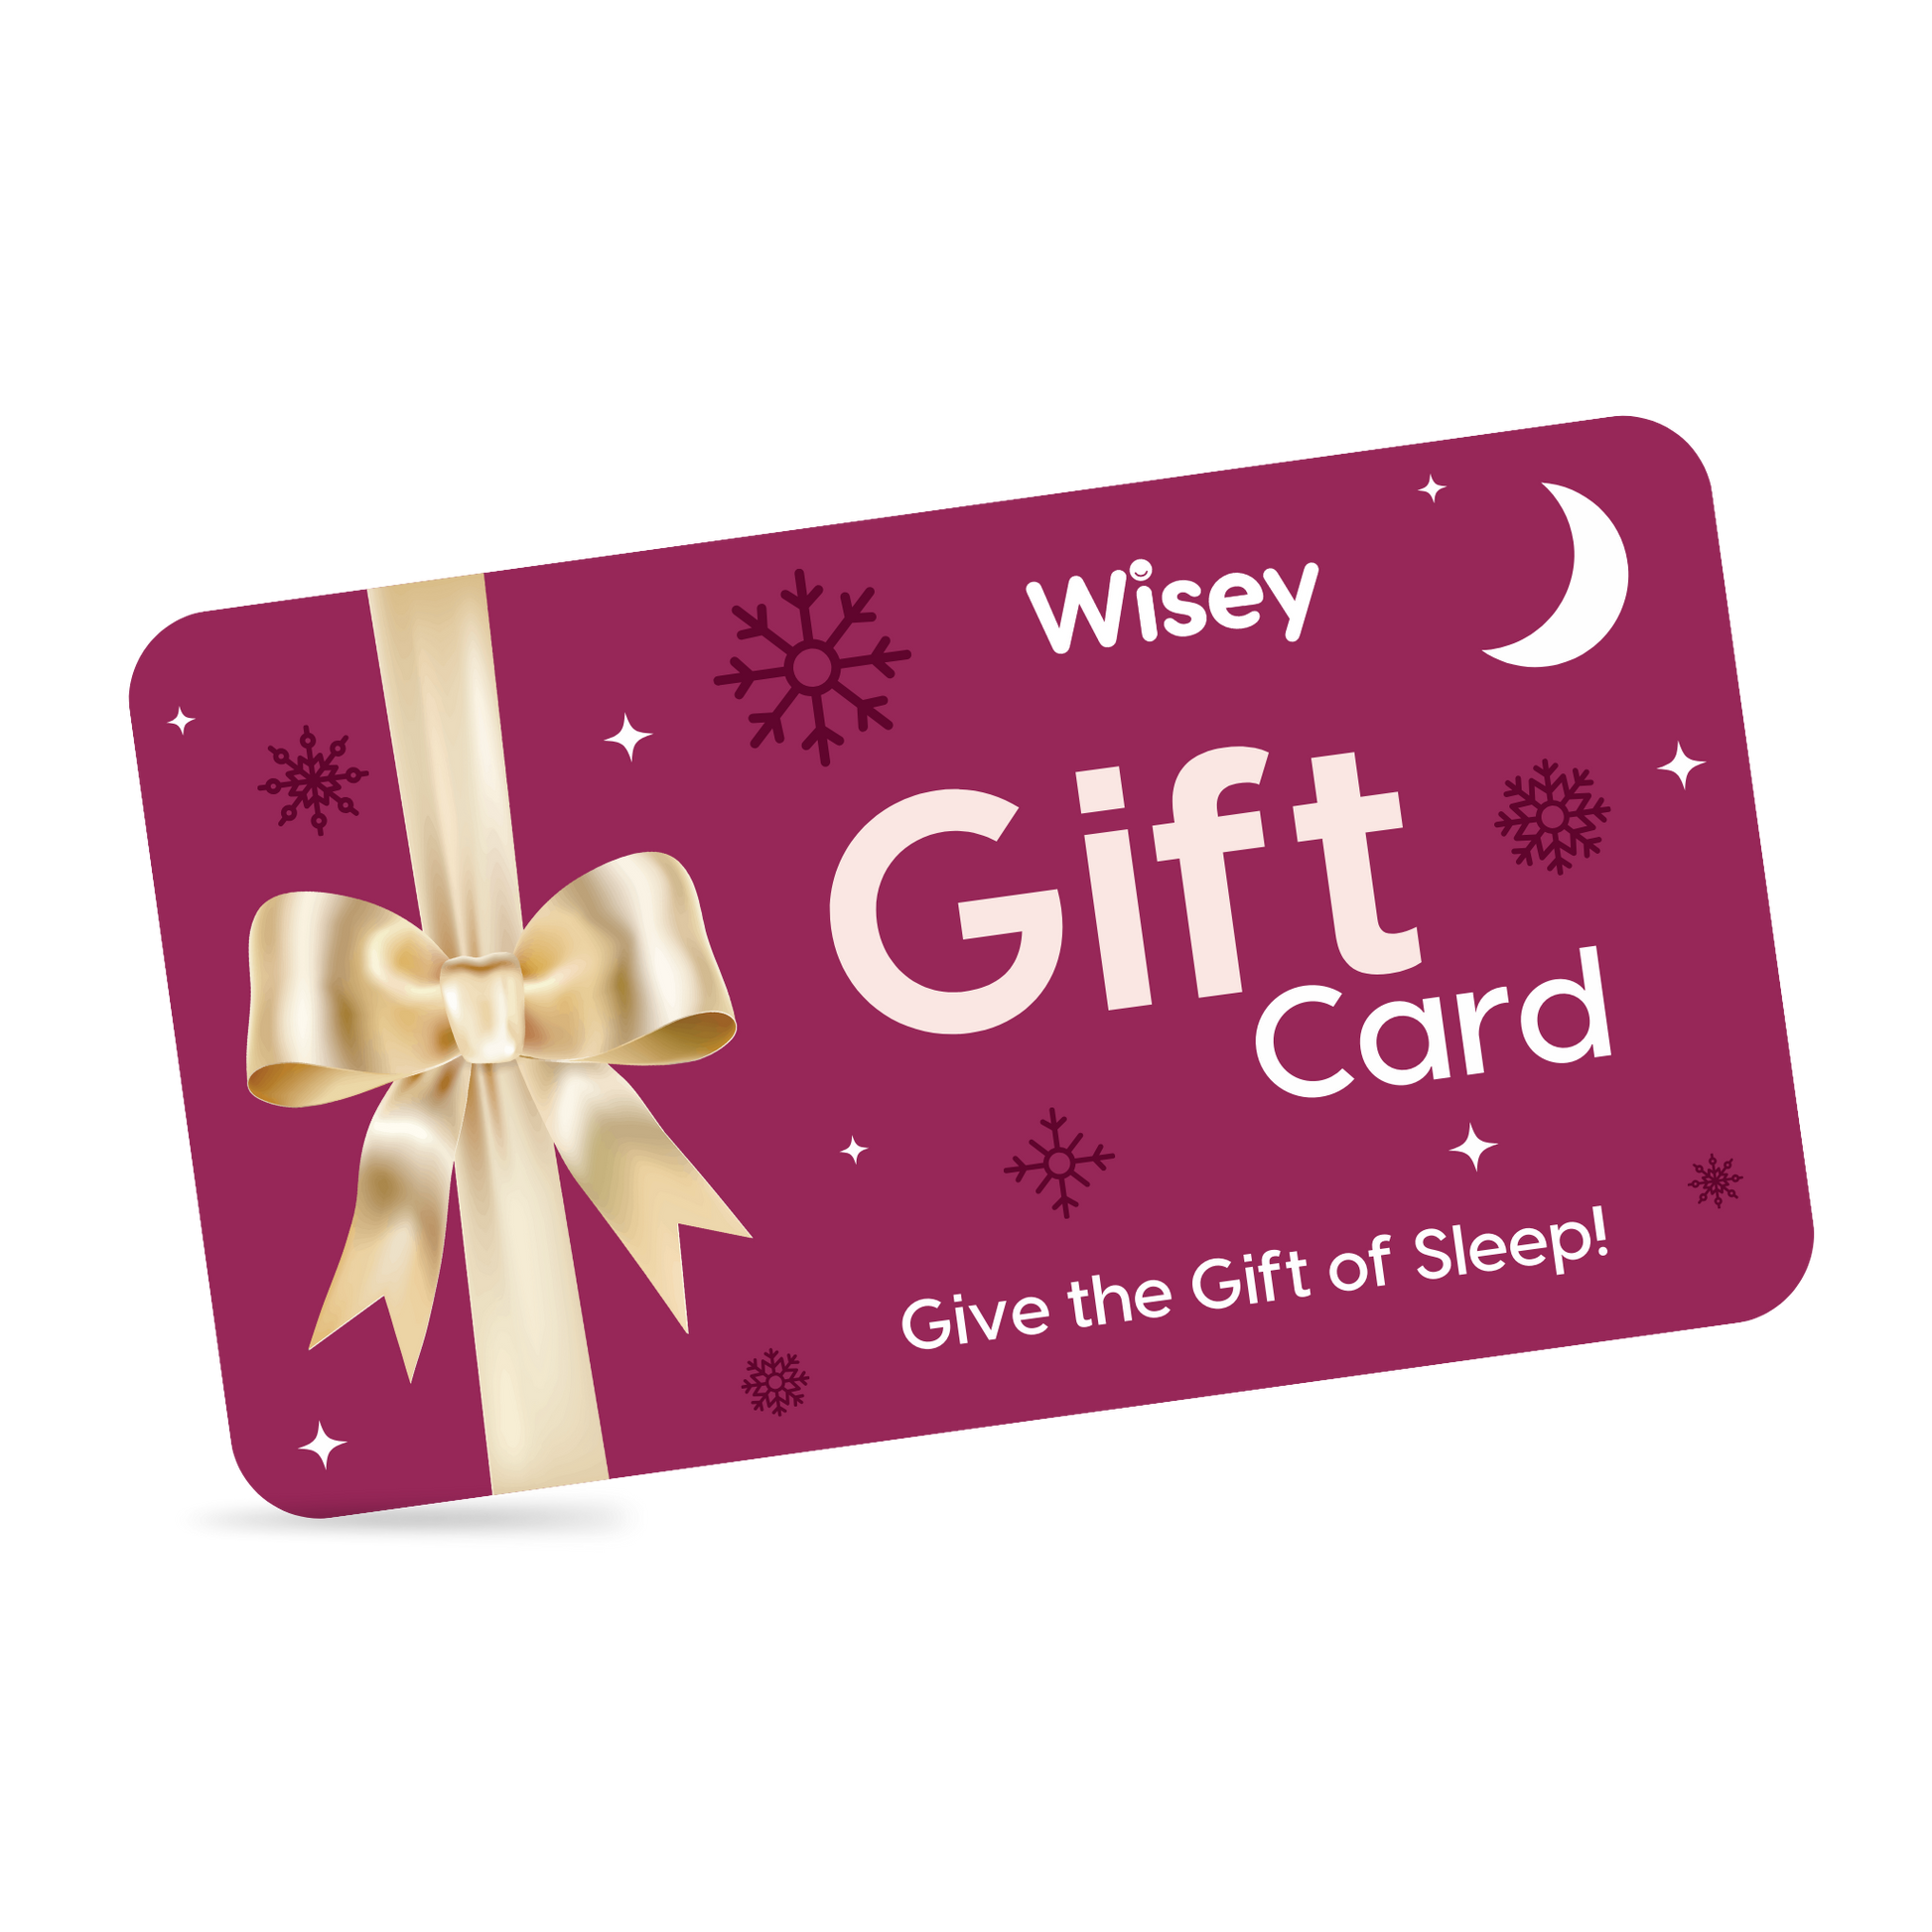 Wisey Gift Card - Wisey